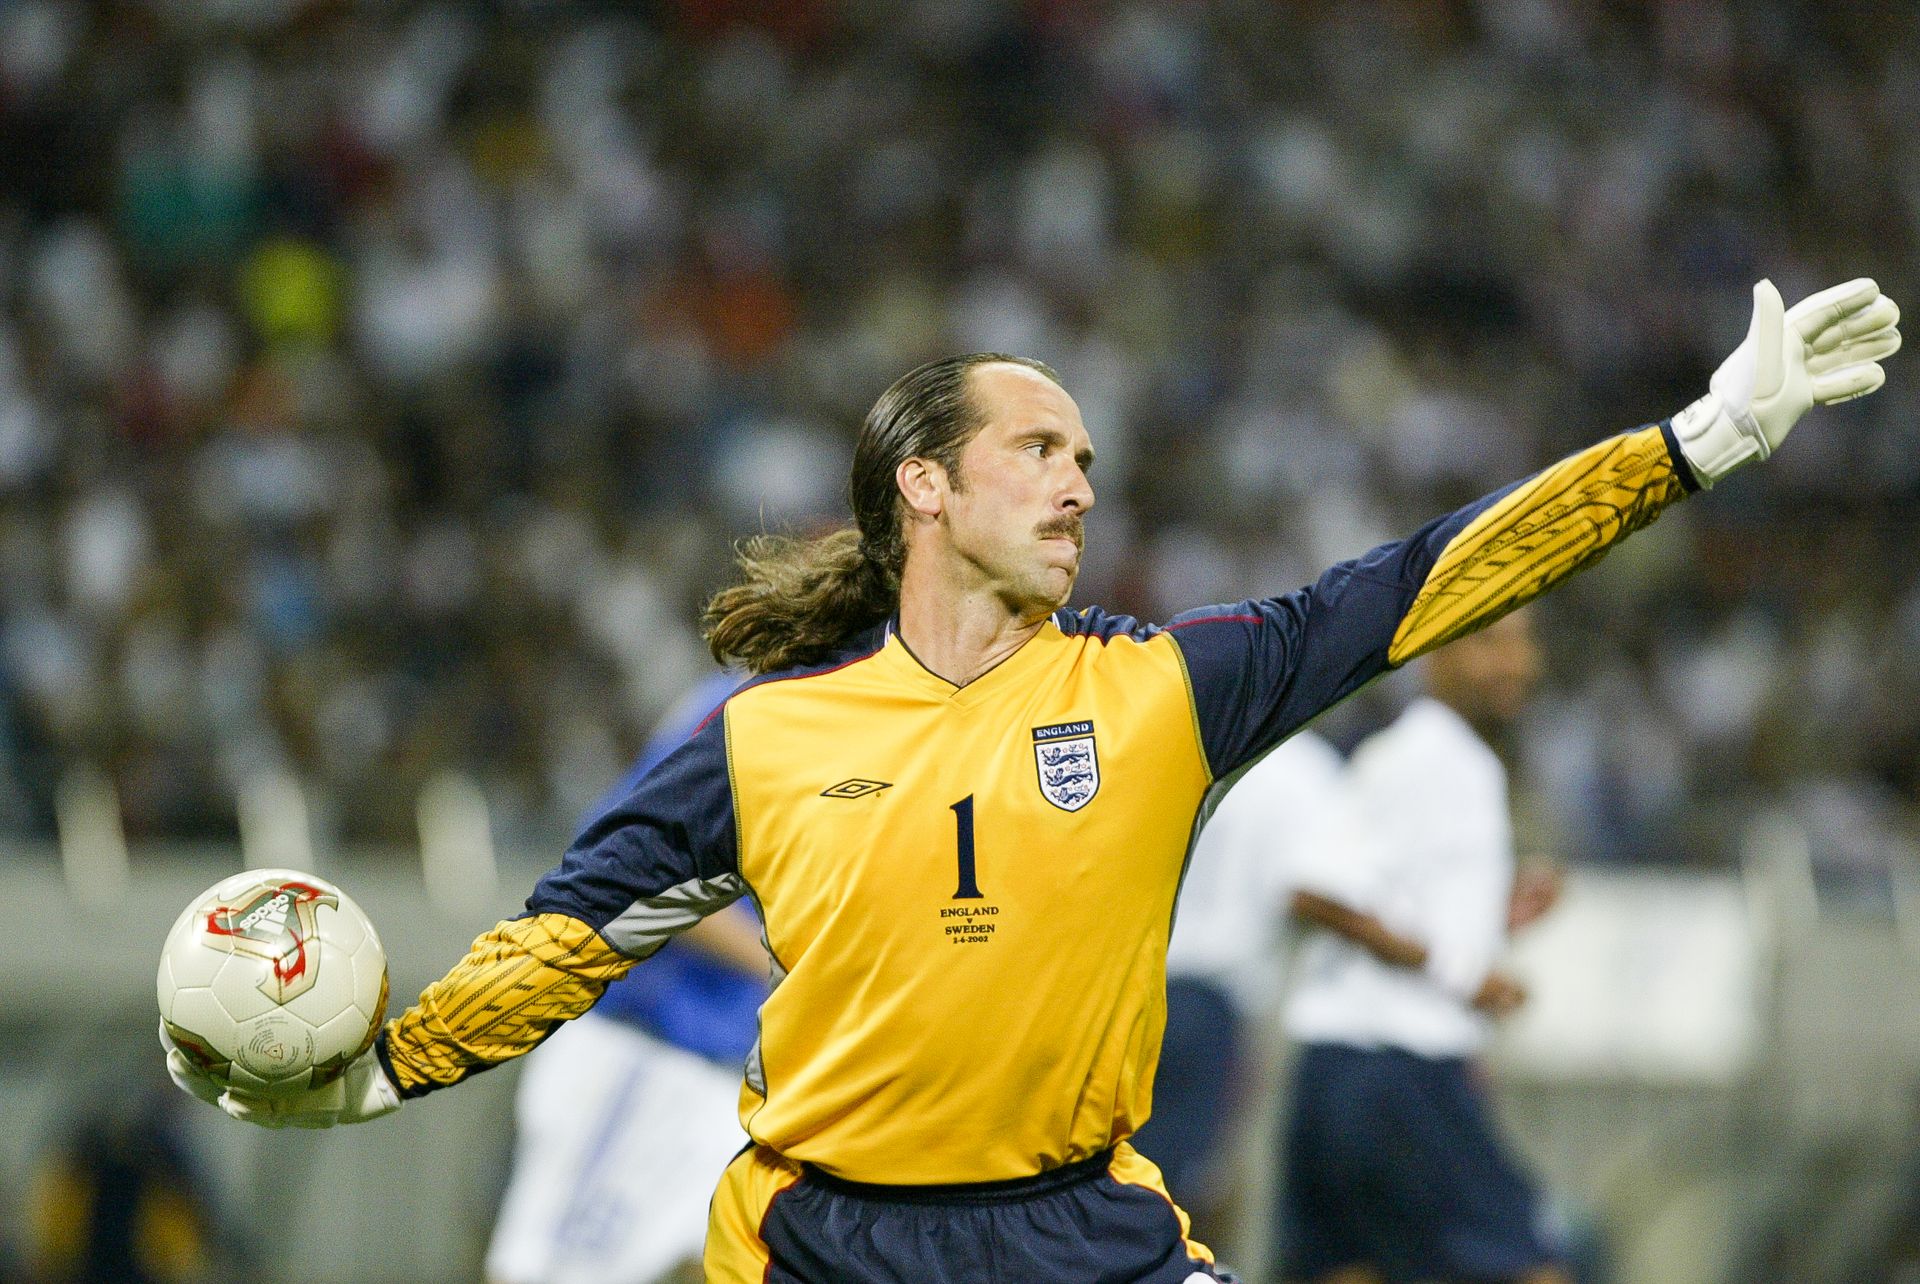 <p>                     David Seaman won the last 20 of his 75 England caps in the early 2000s and was still a great goalkeeper in his final years – even if he is remembered for his mistake against Brazil in the World Cup quarter-finals in 2002.                   </p>                                      <p>                     Beaten by Ronaldinho's long-range free-kick as he expected a cross, Seaman was mortified. He retired from England duty that summer, but played on for two more seasons – one with Arsenal and another at Manchester City.                   </p>